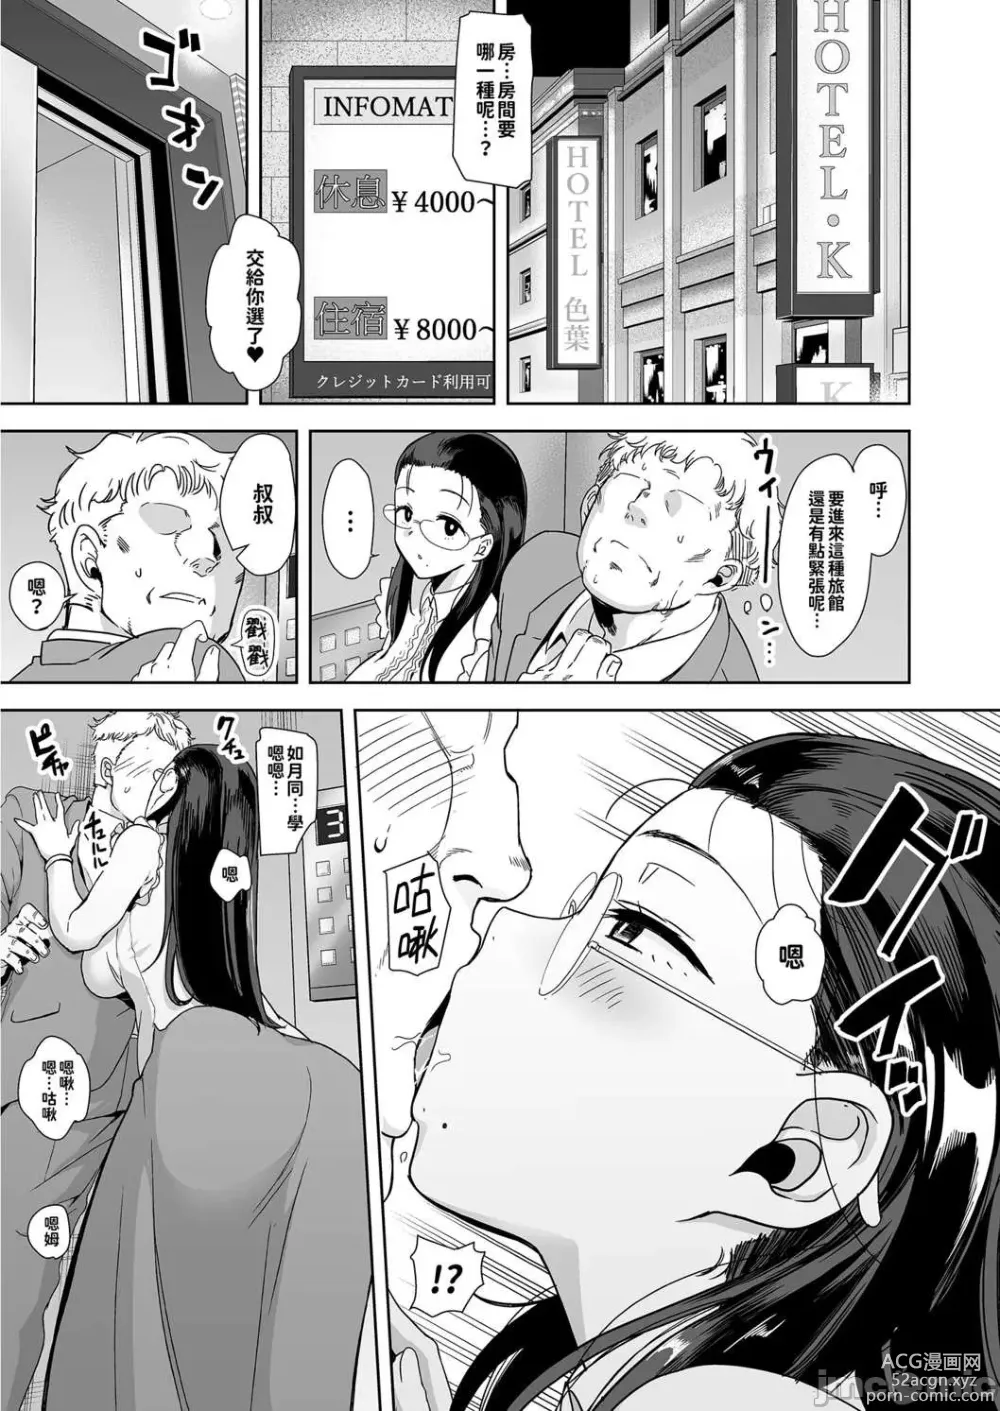 Page 5 of doujinshi 聖華女学院高等部公認竿おじさん 1